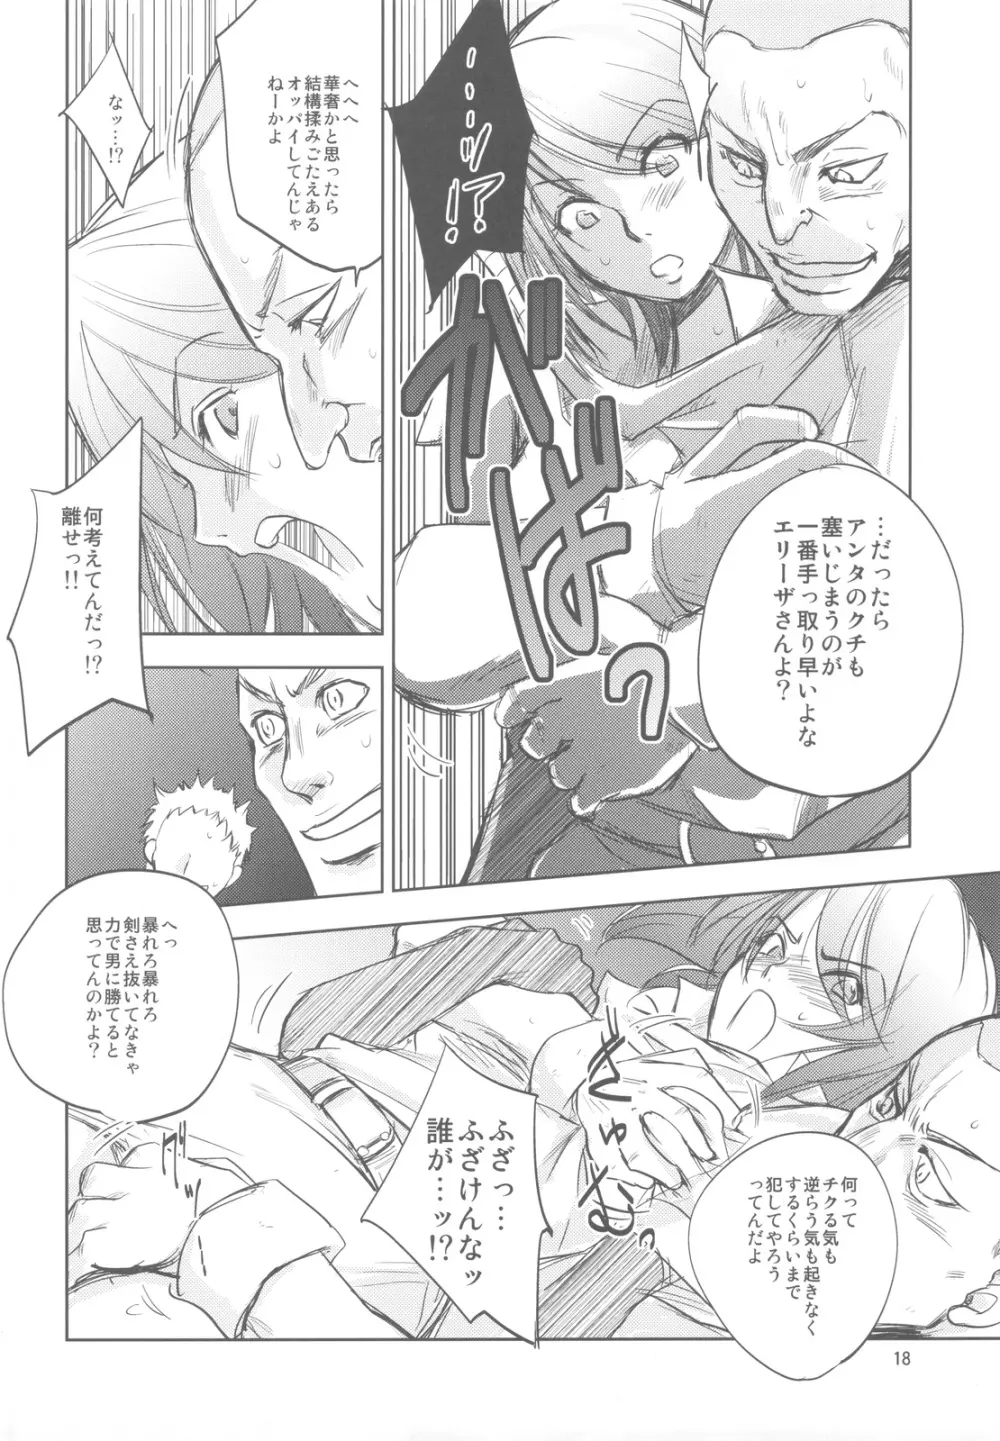 GRASSEN'S WAR ANOTHER STORY Ex #01 ノード侵攻 I Page.17